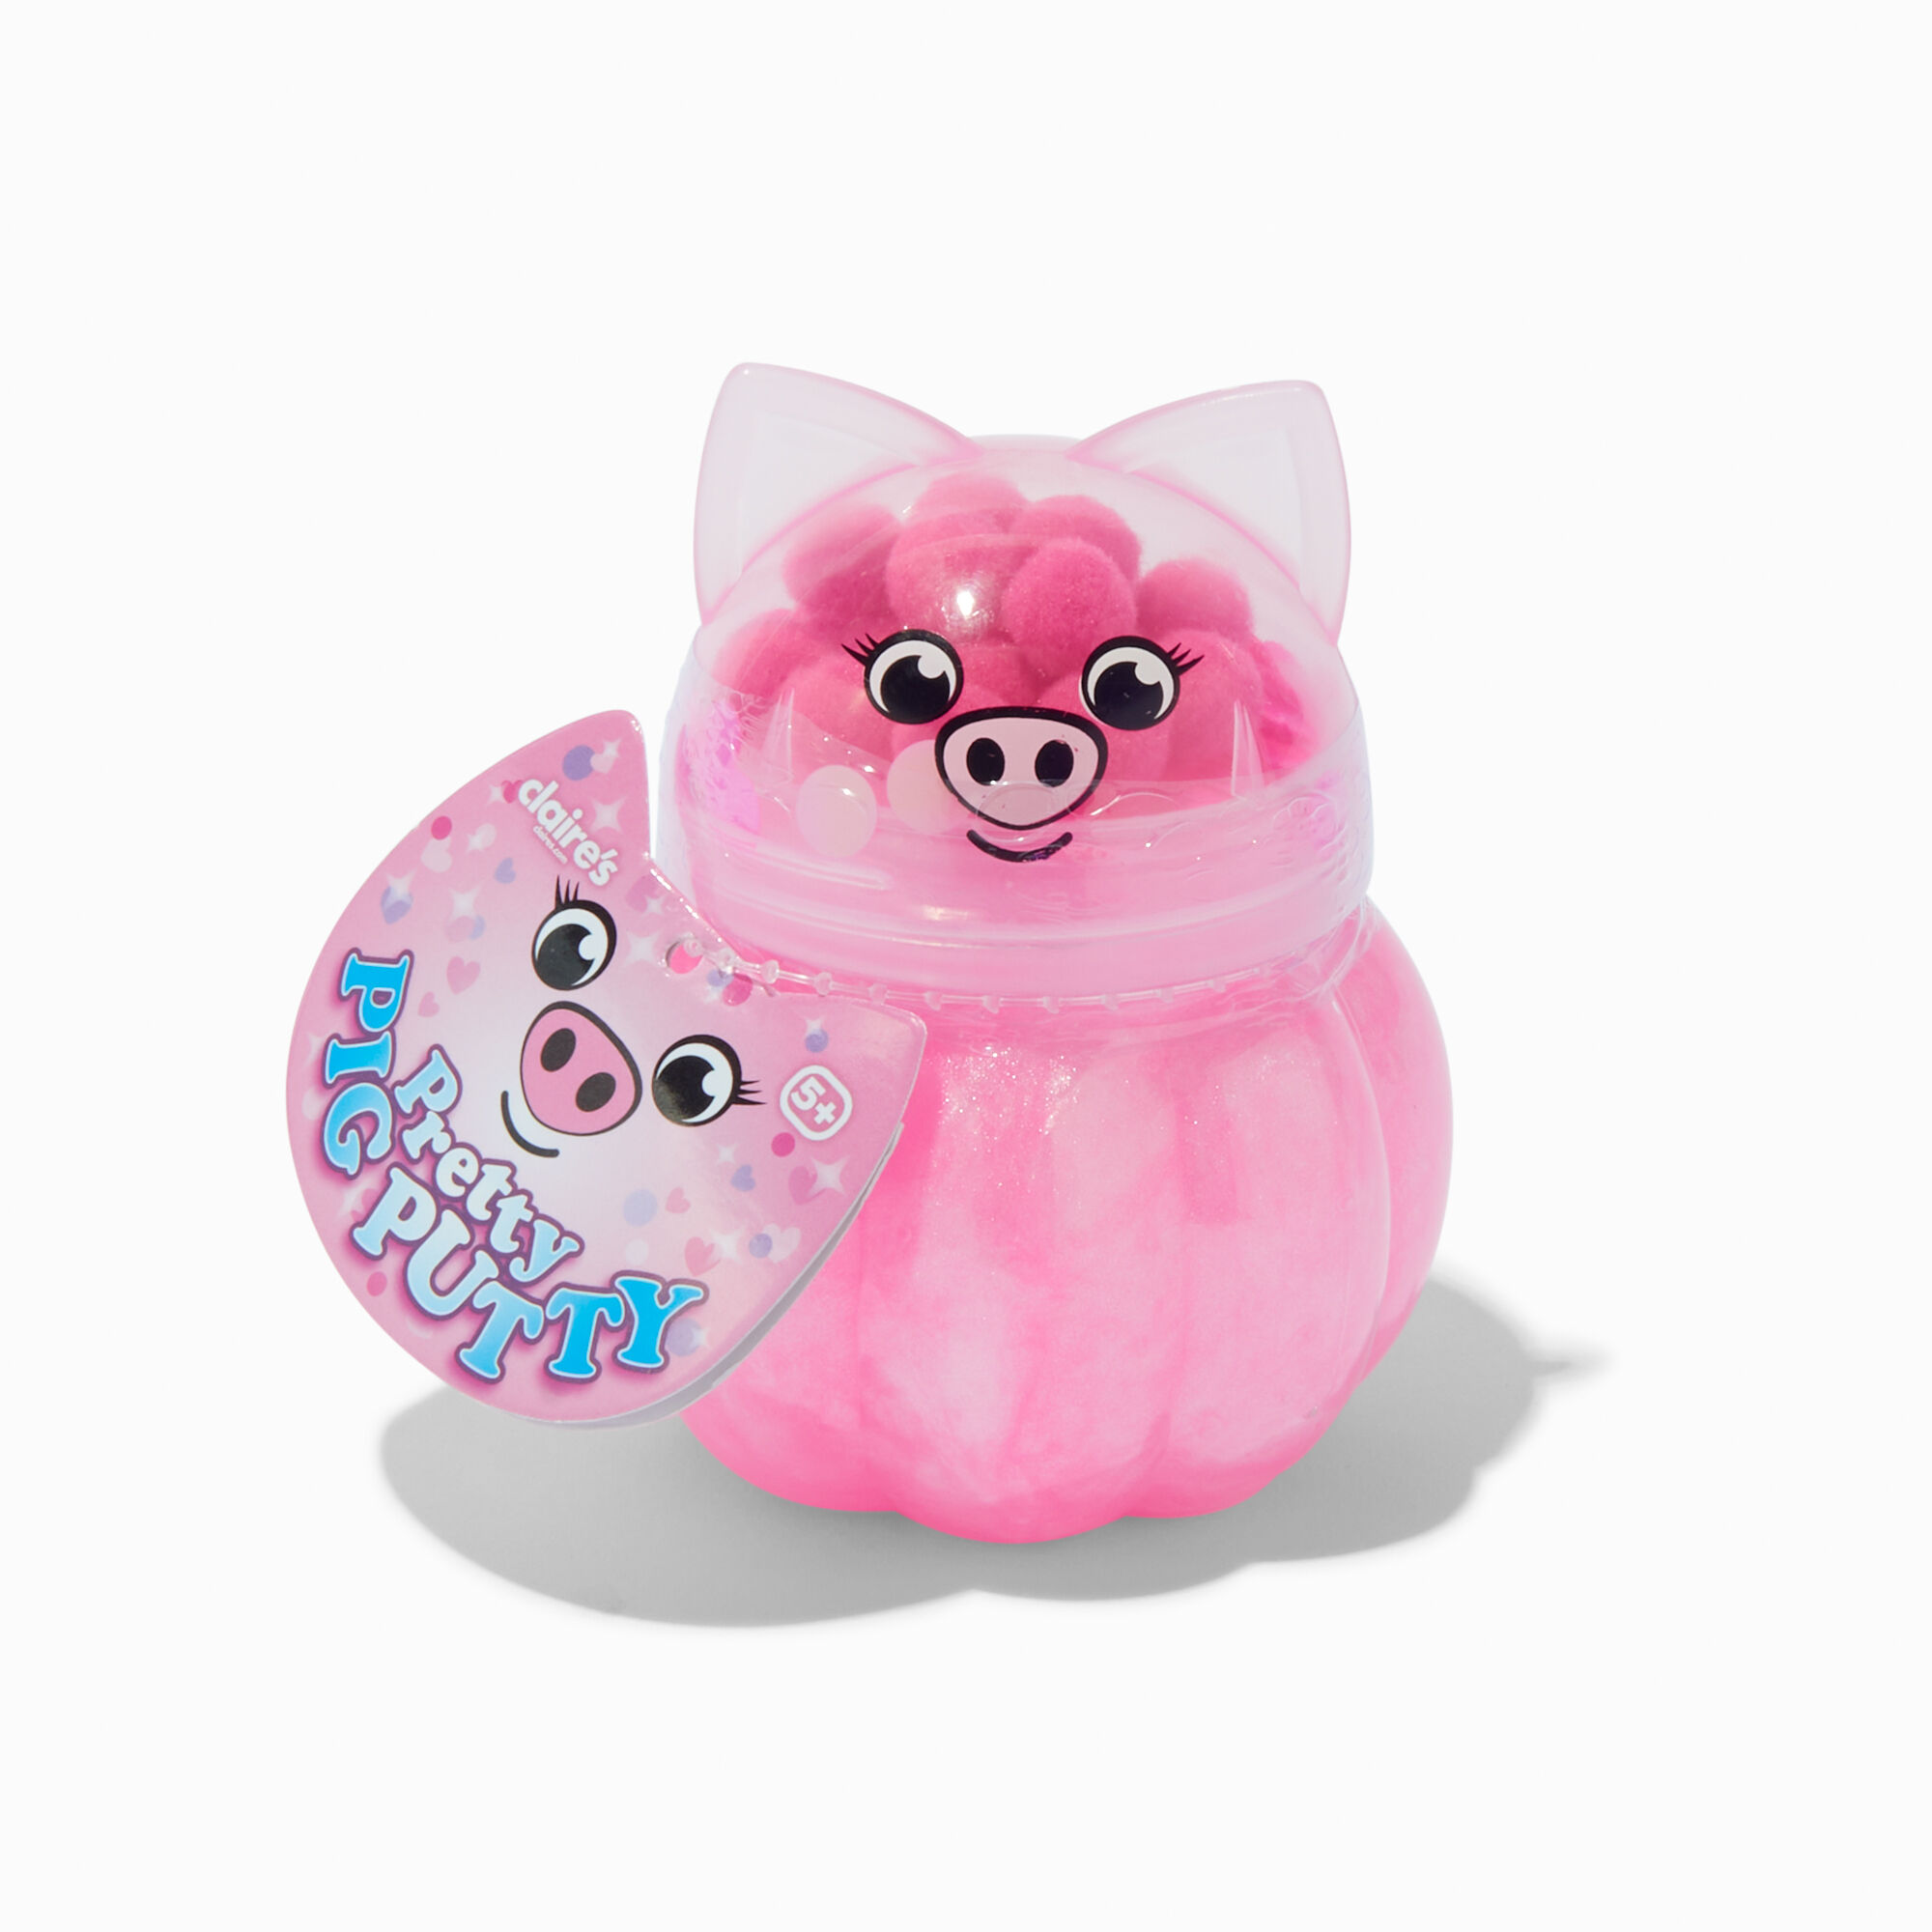 View Pretty Pig Claires Exclusive Putty Pot information